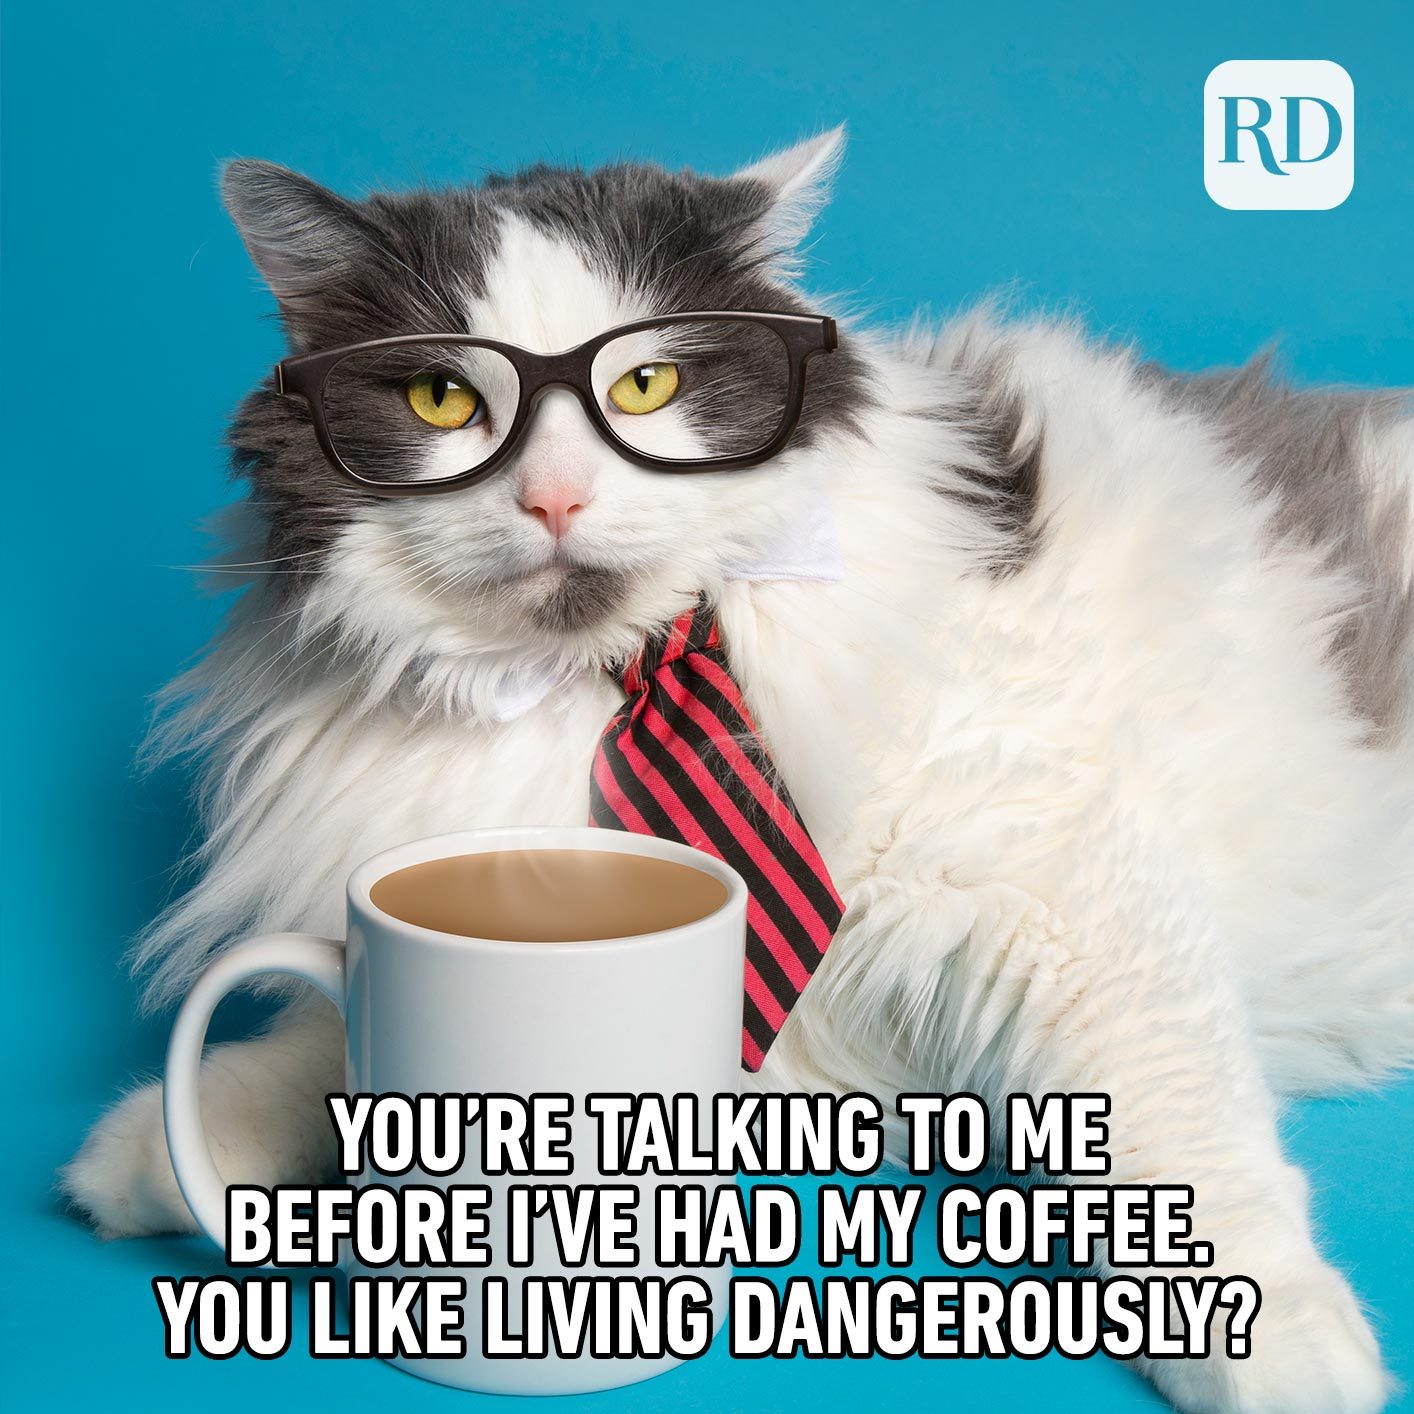 35 Cat Memes You'll Laugh at Every Time | Reader's Digest